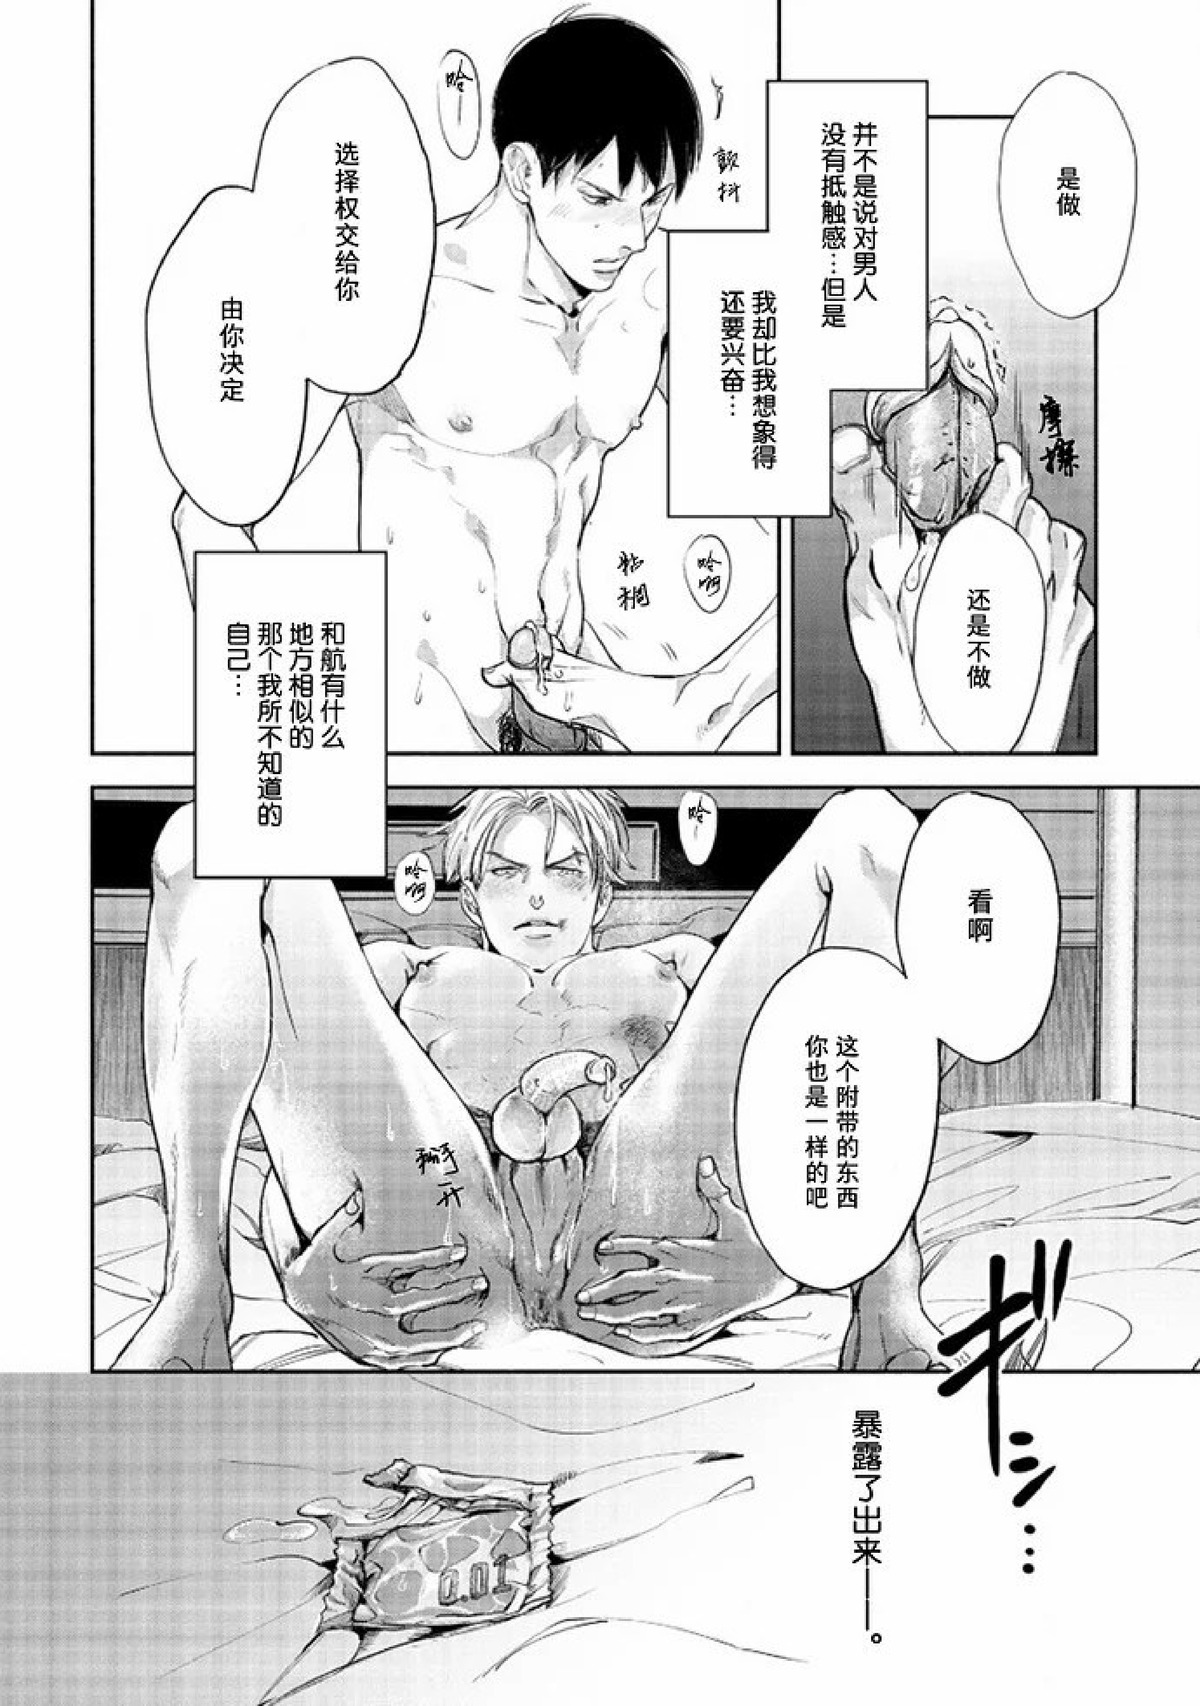 【Two sides of the same coin[耽美]】漫画-（上卷01-02）章节漫画下拉式图片-98.jpg